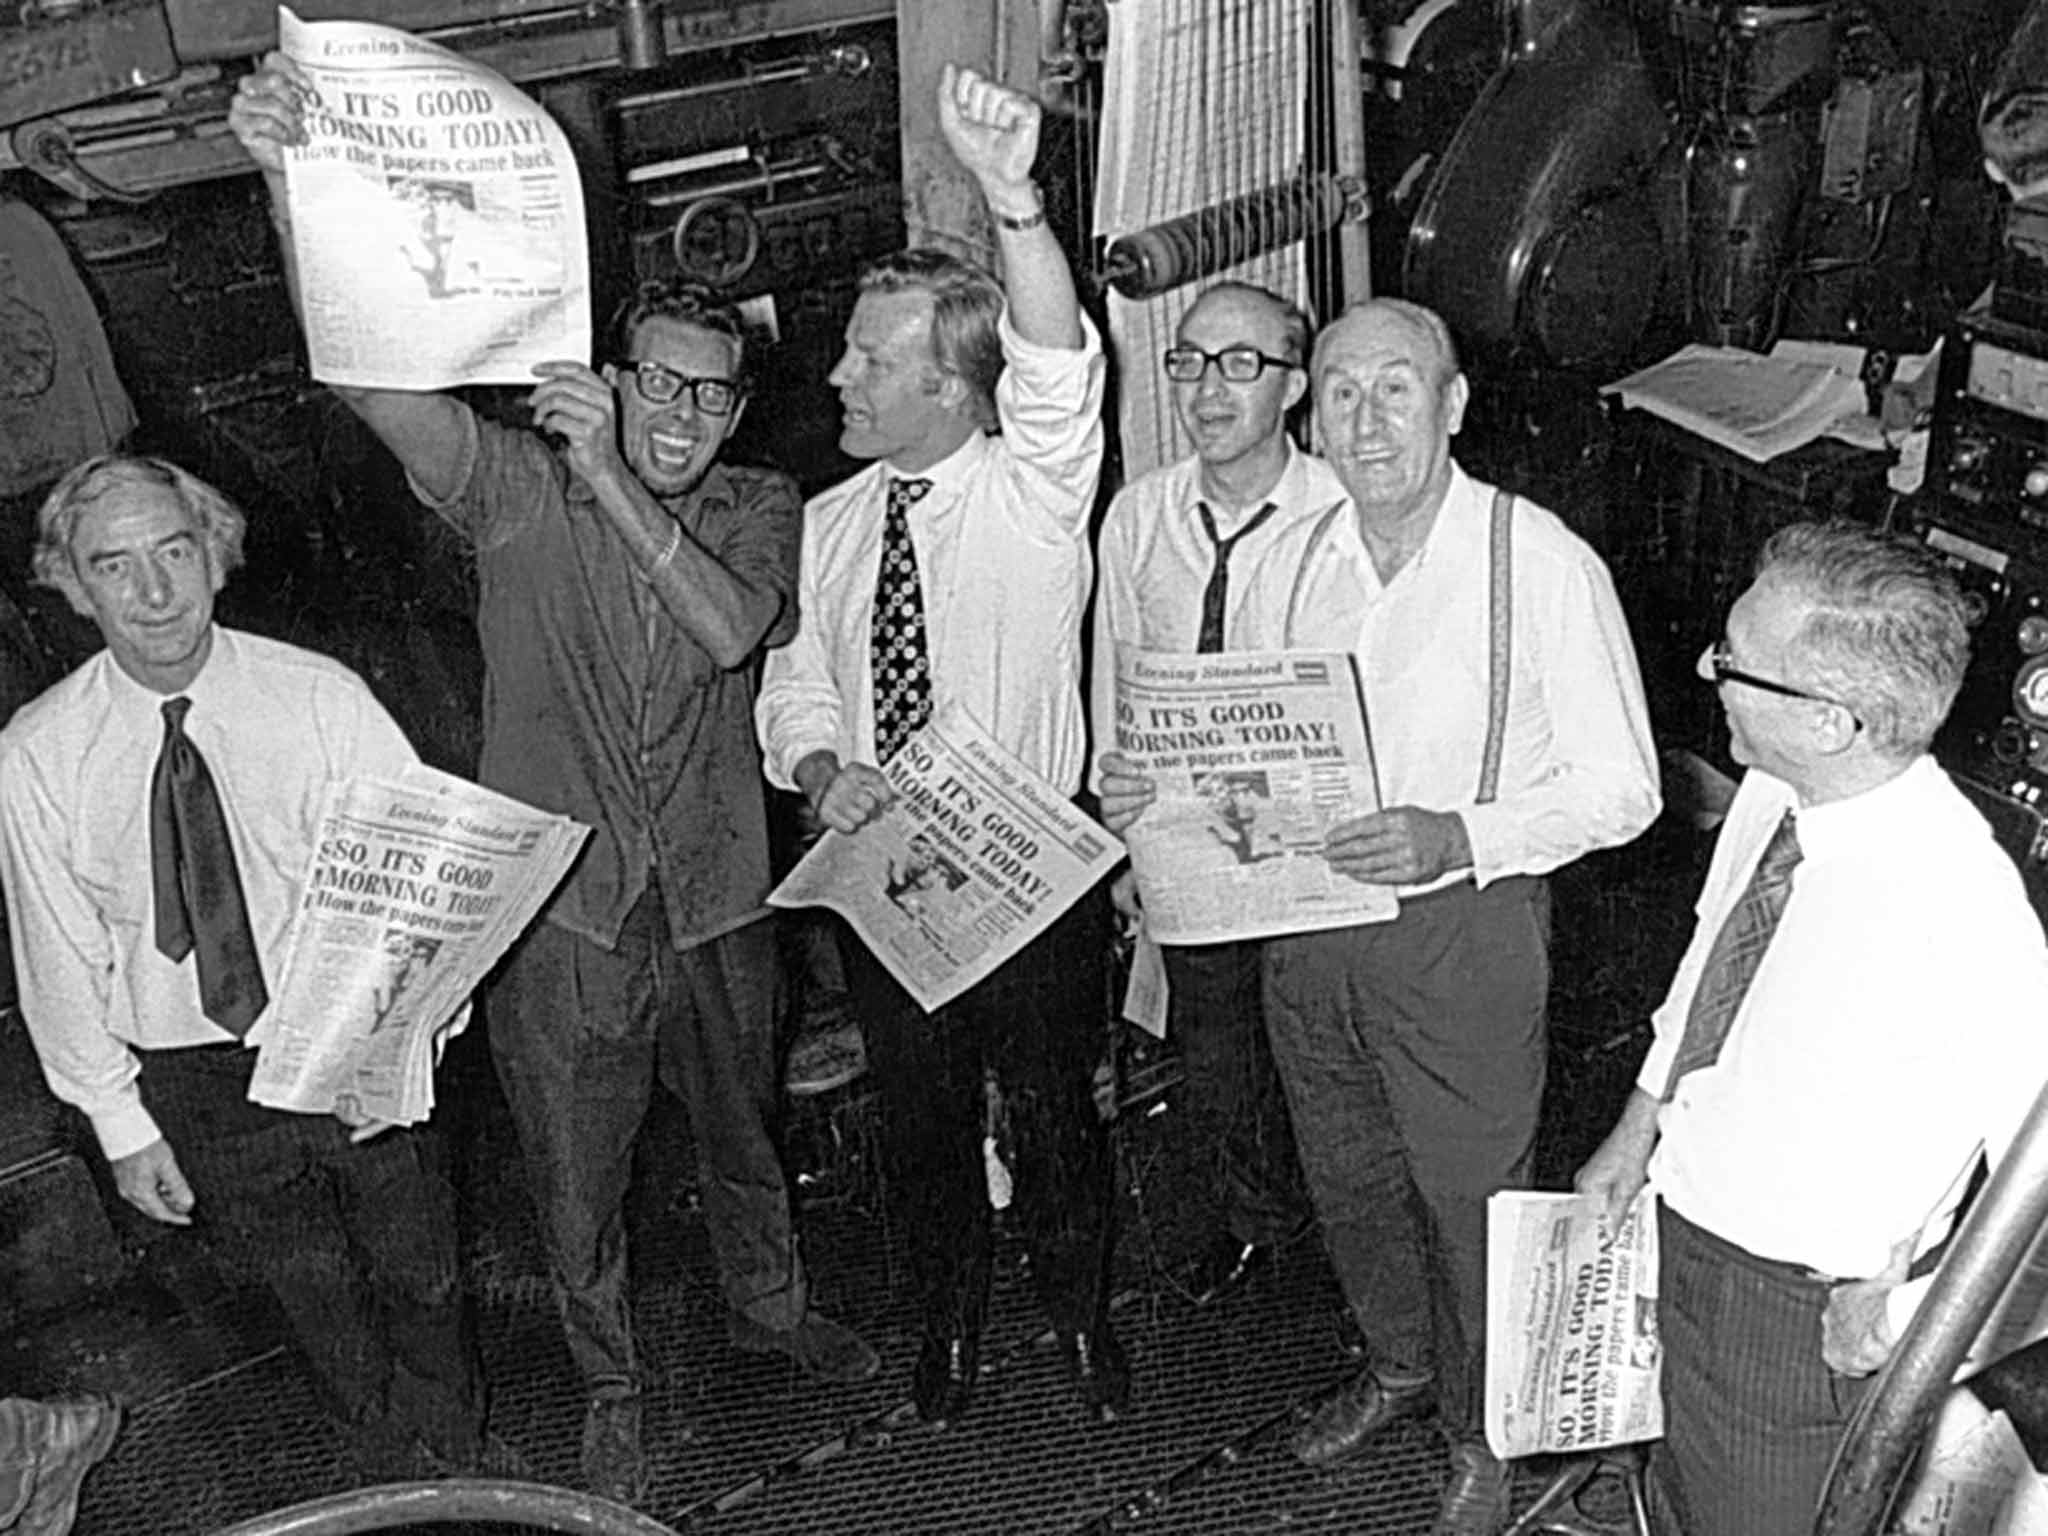 Stevens, with arm raised, and 'Daily Express' colleagues at the end of a print strike in 1971